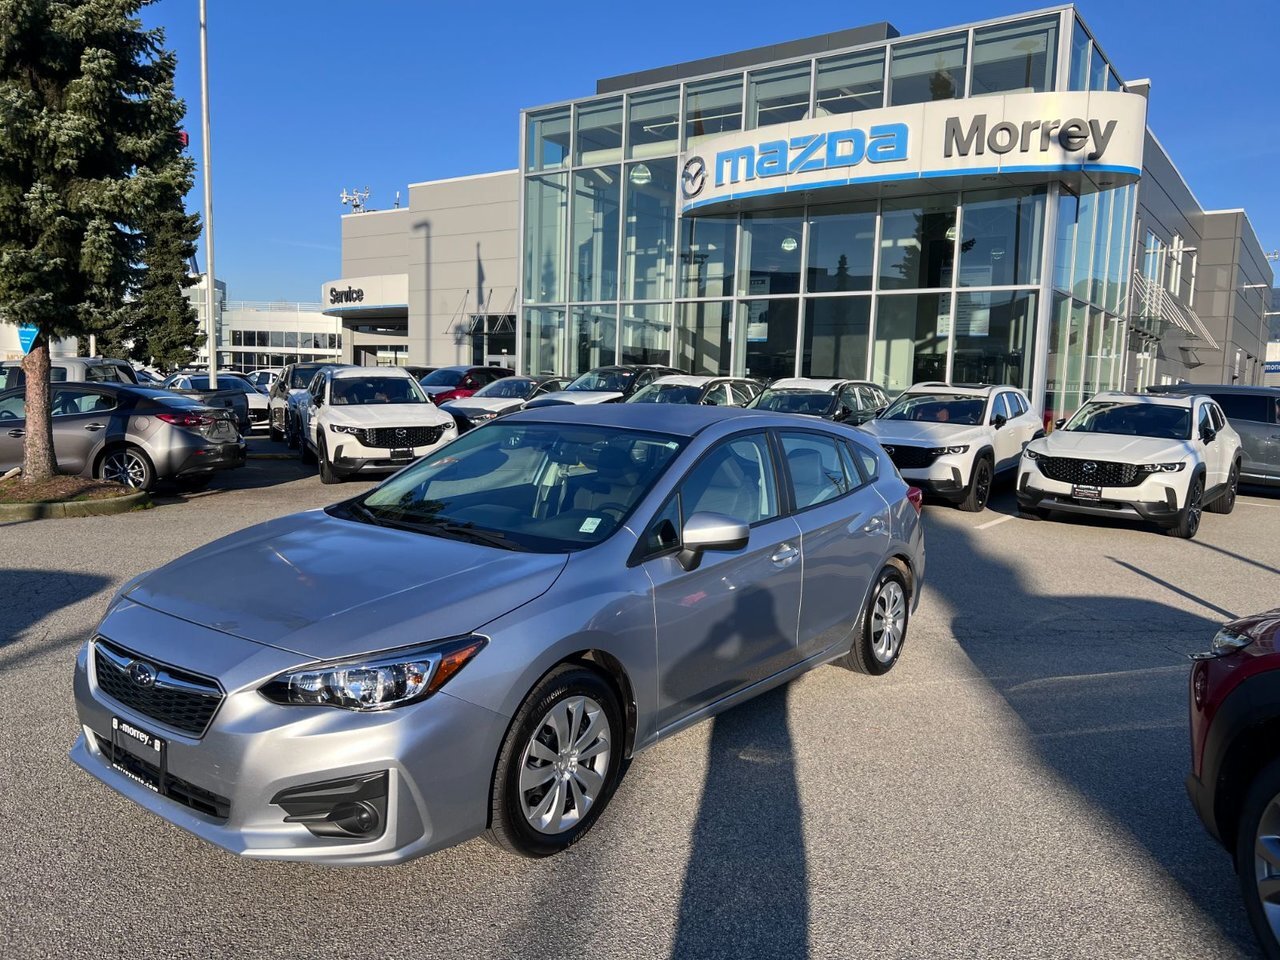 2019 Subaru Impreza 5Dr Convenience CVT Locally owned! Finance package